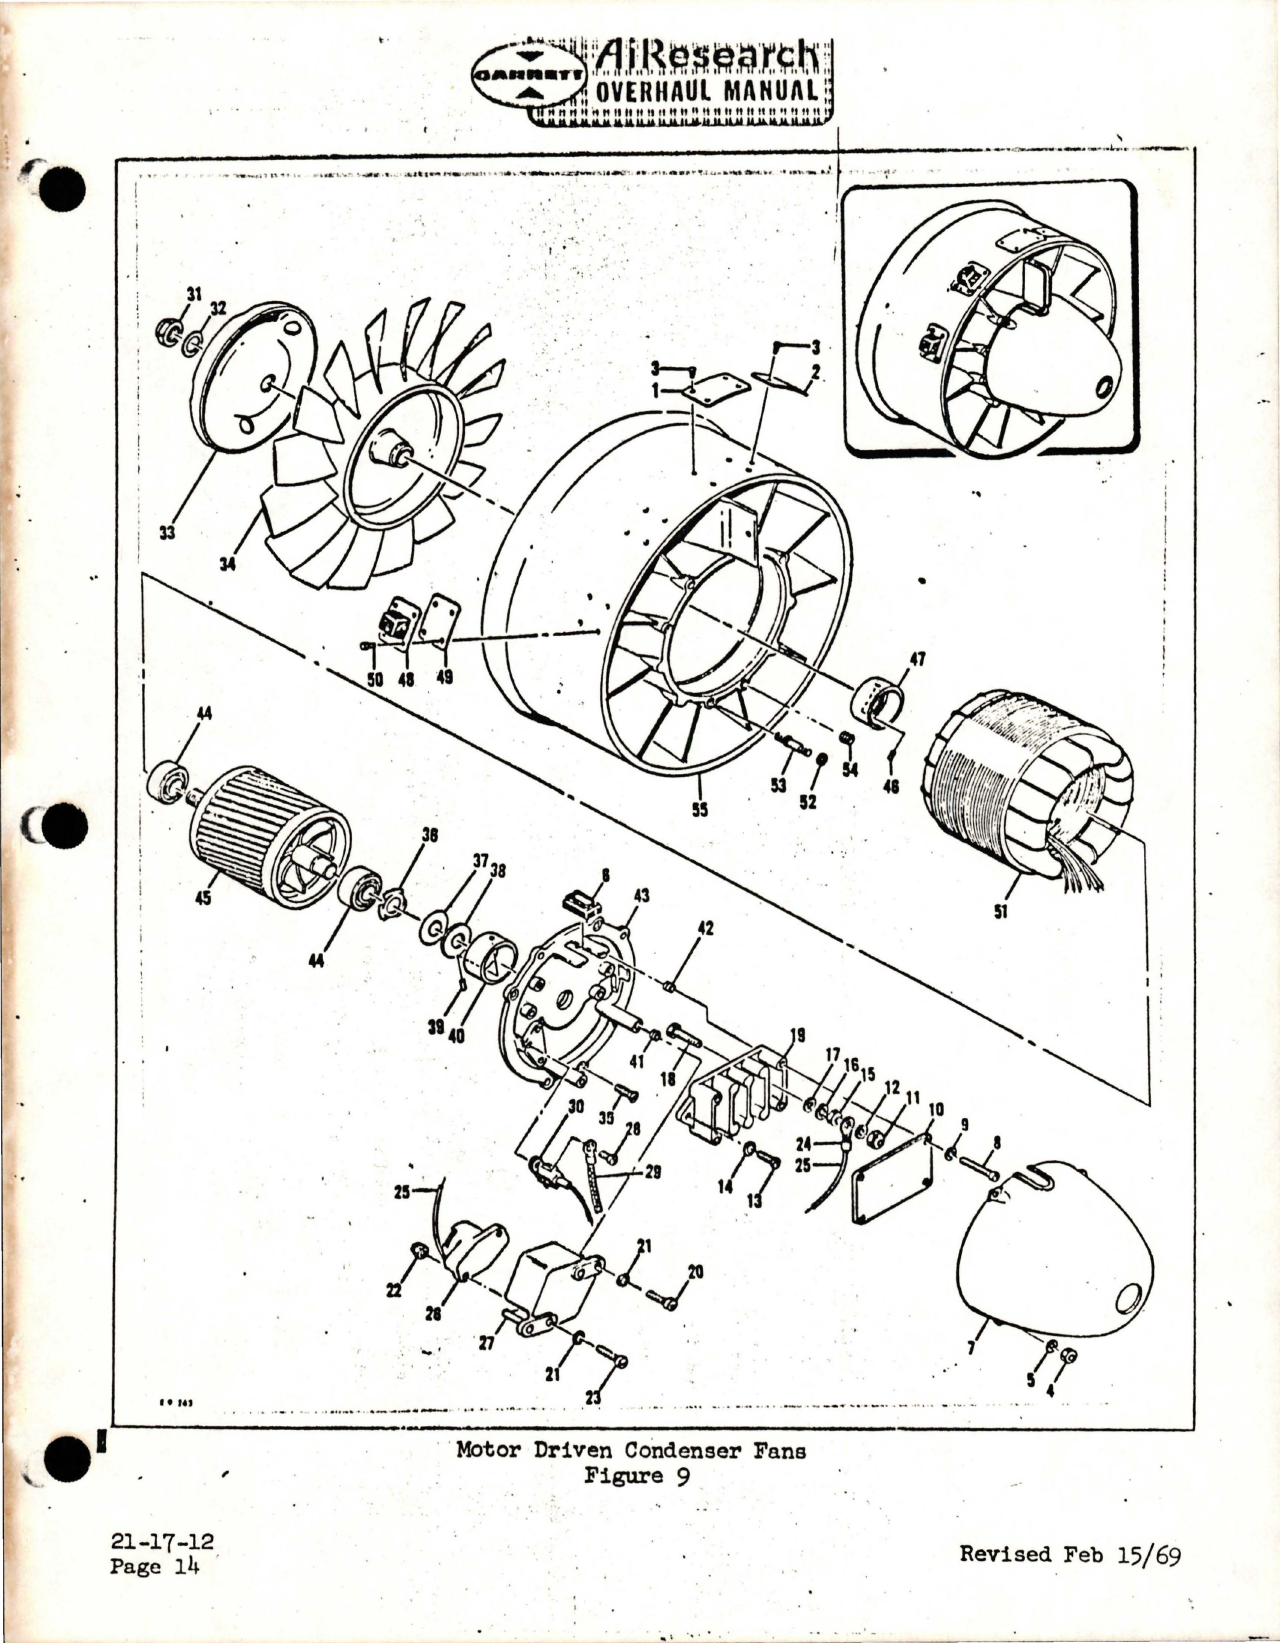 Sample page 5 from AirCorps Library document: Overhaul Manual for Motor Driven Condenser Fans - Parts 207560-1, 207560-1-2, and 207560-1-3